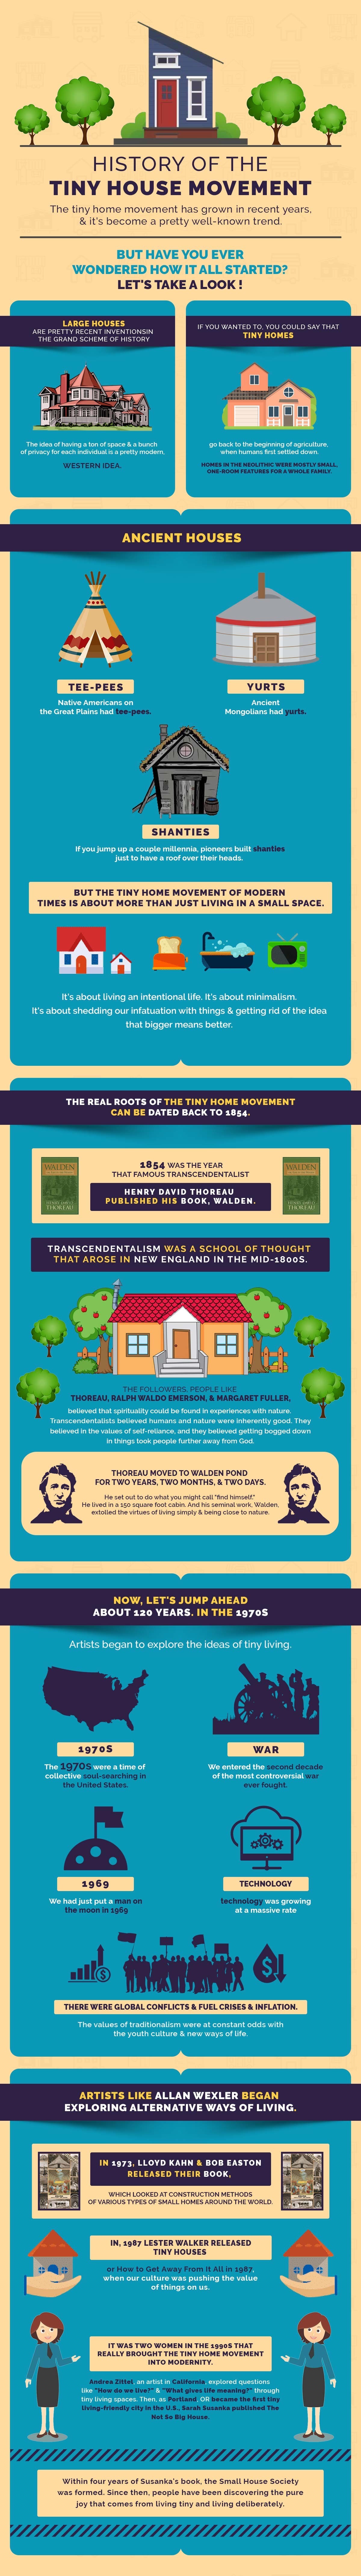 History of the tiny house movement infographic